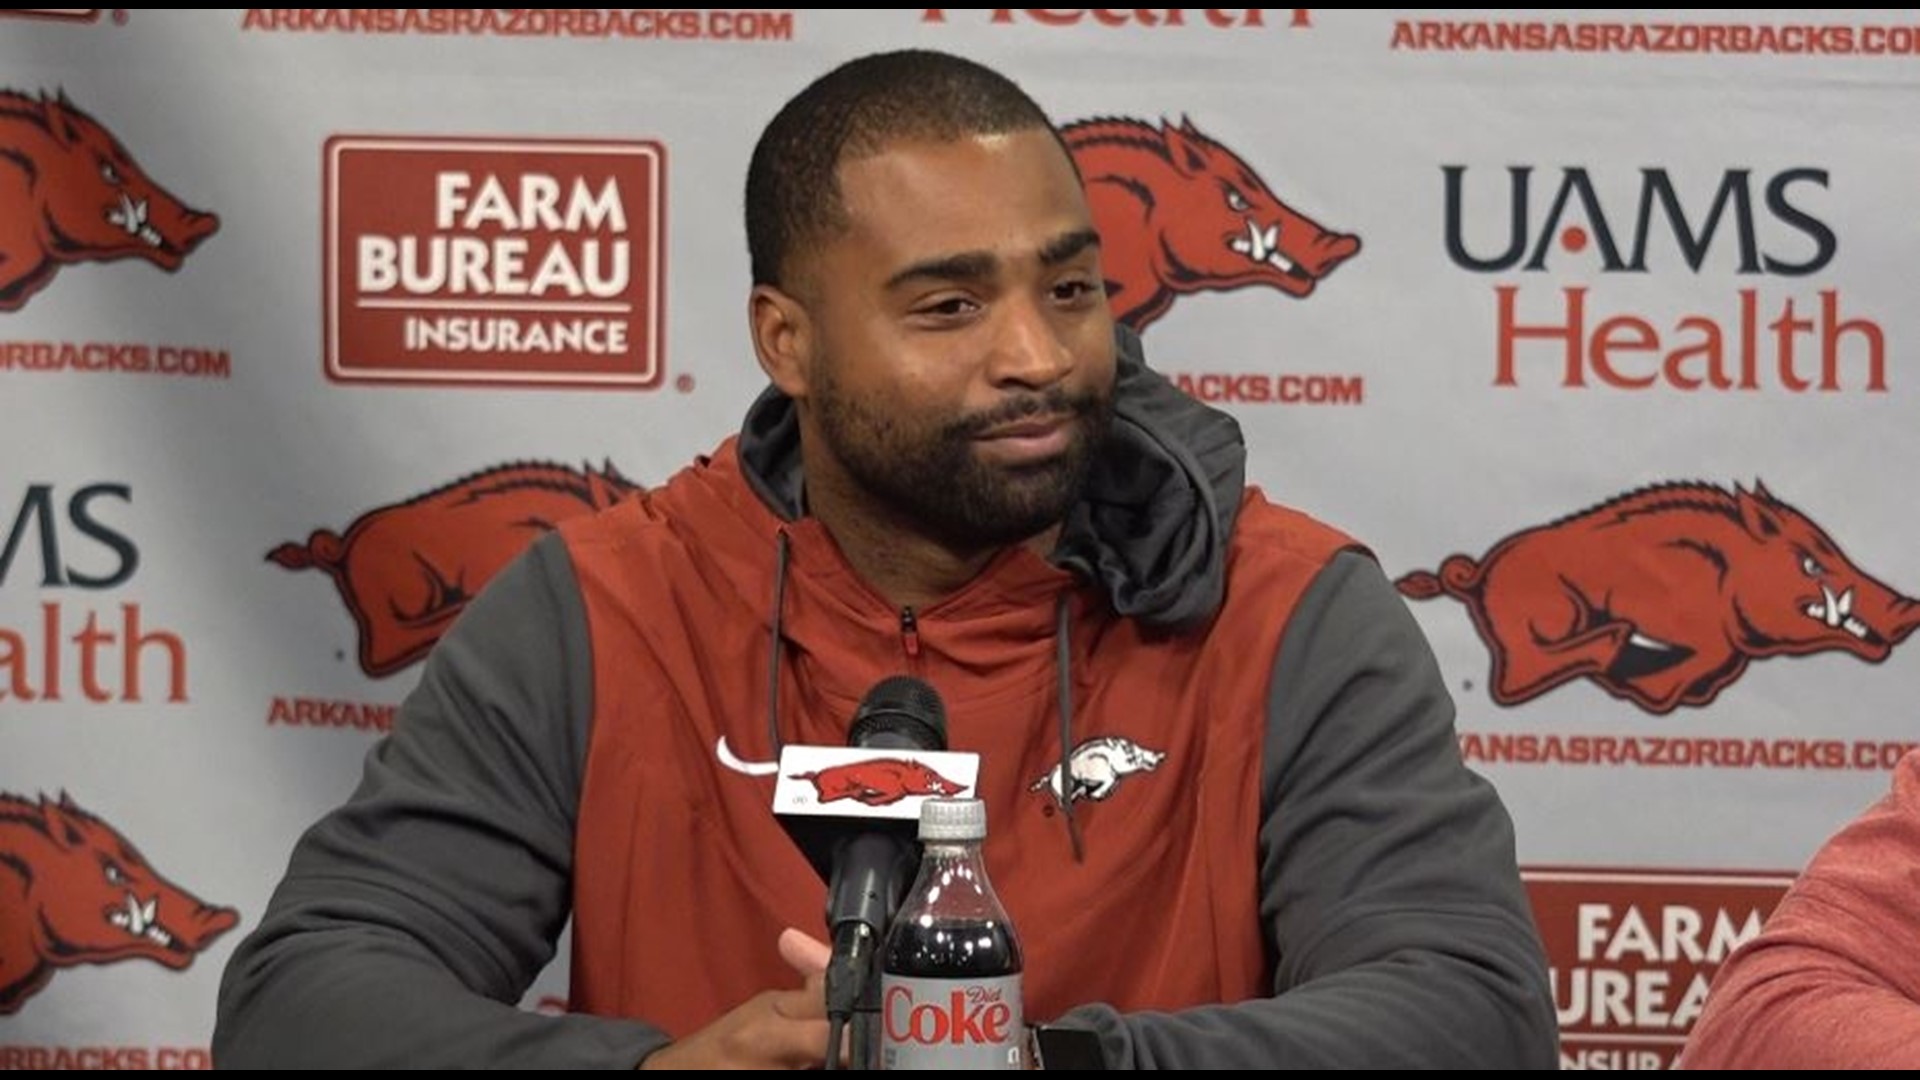 The Razorbacks three newest coaches talk about the decision to come to Arkansas.